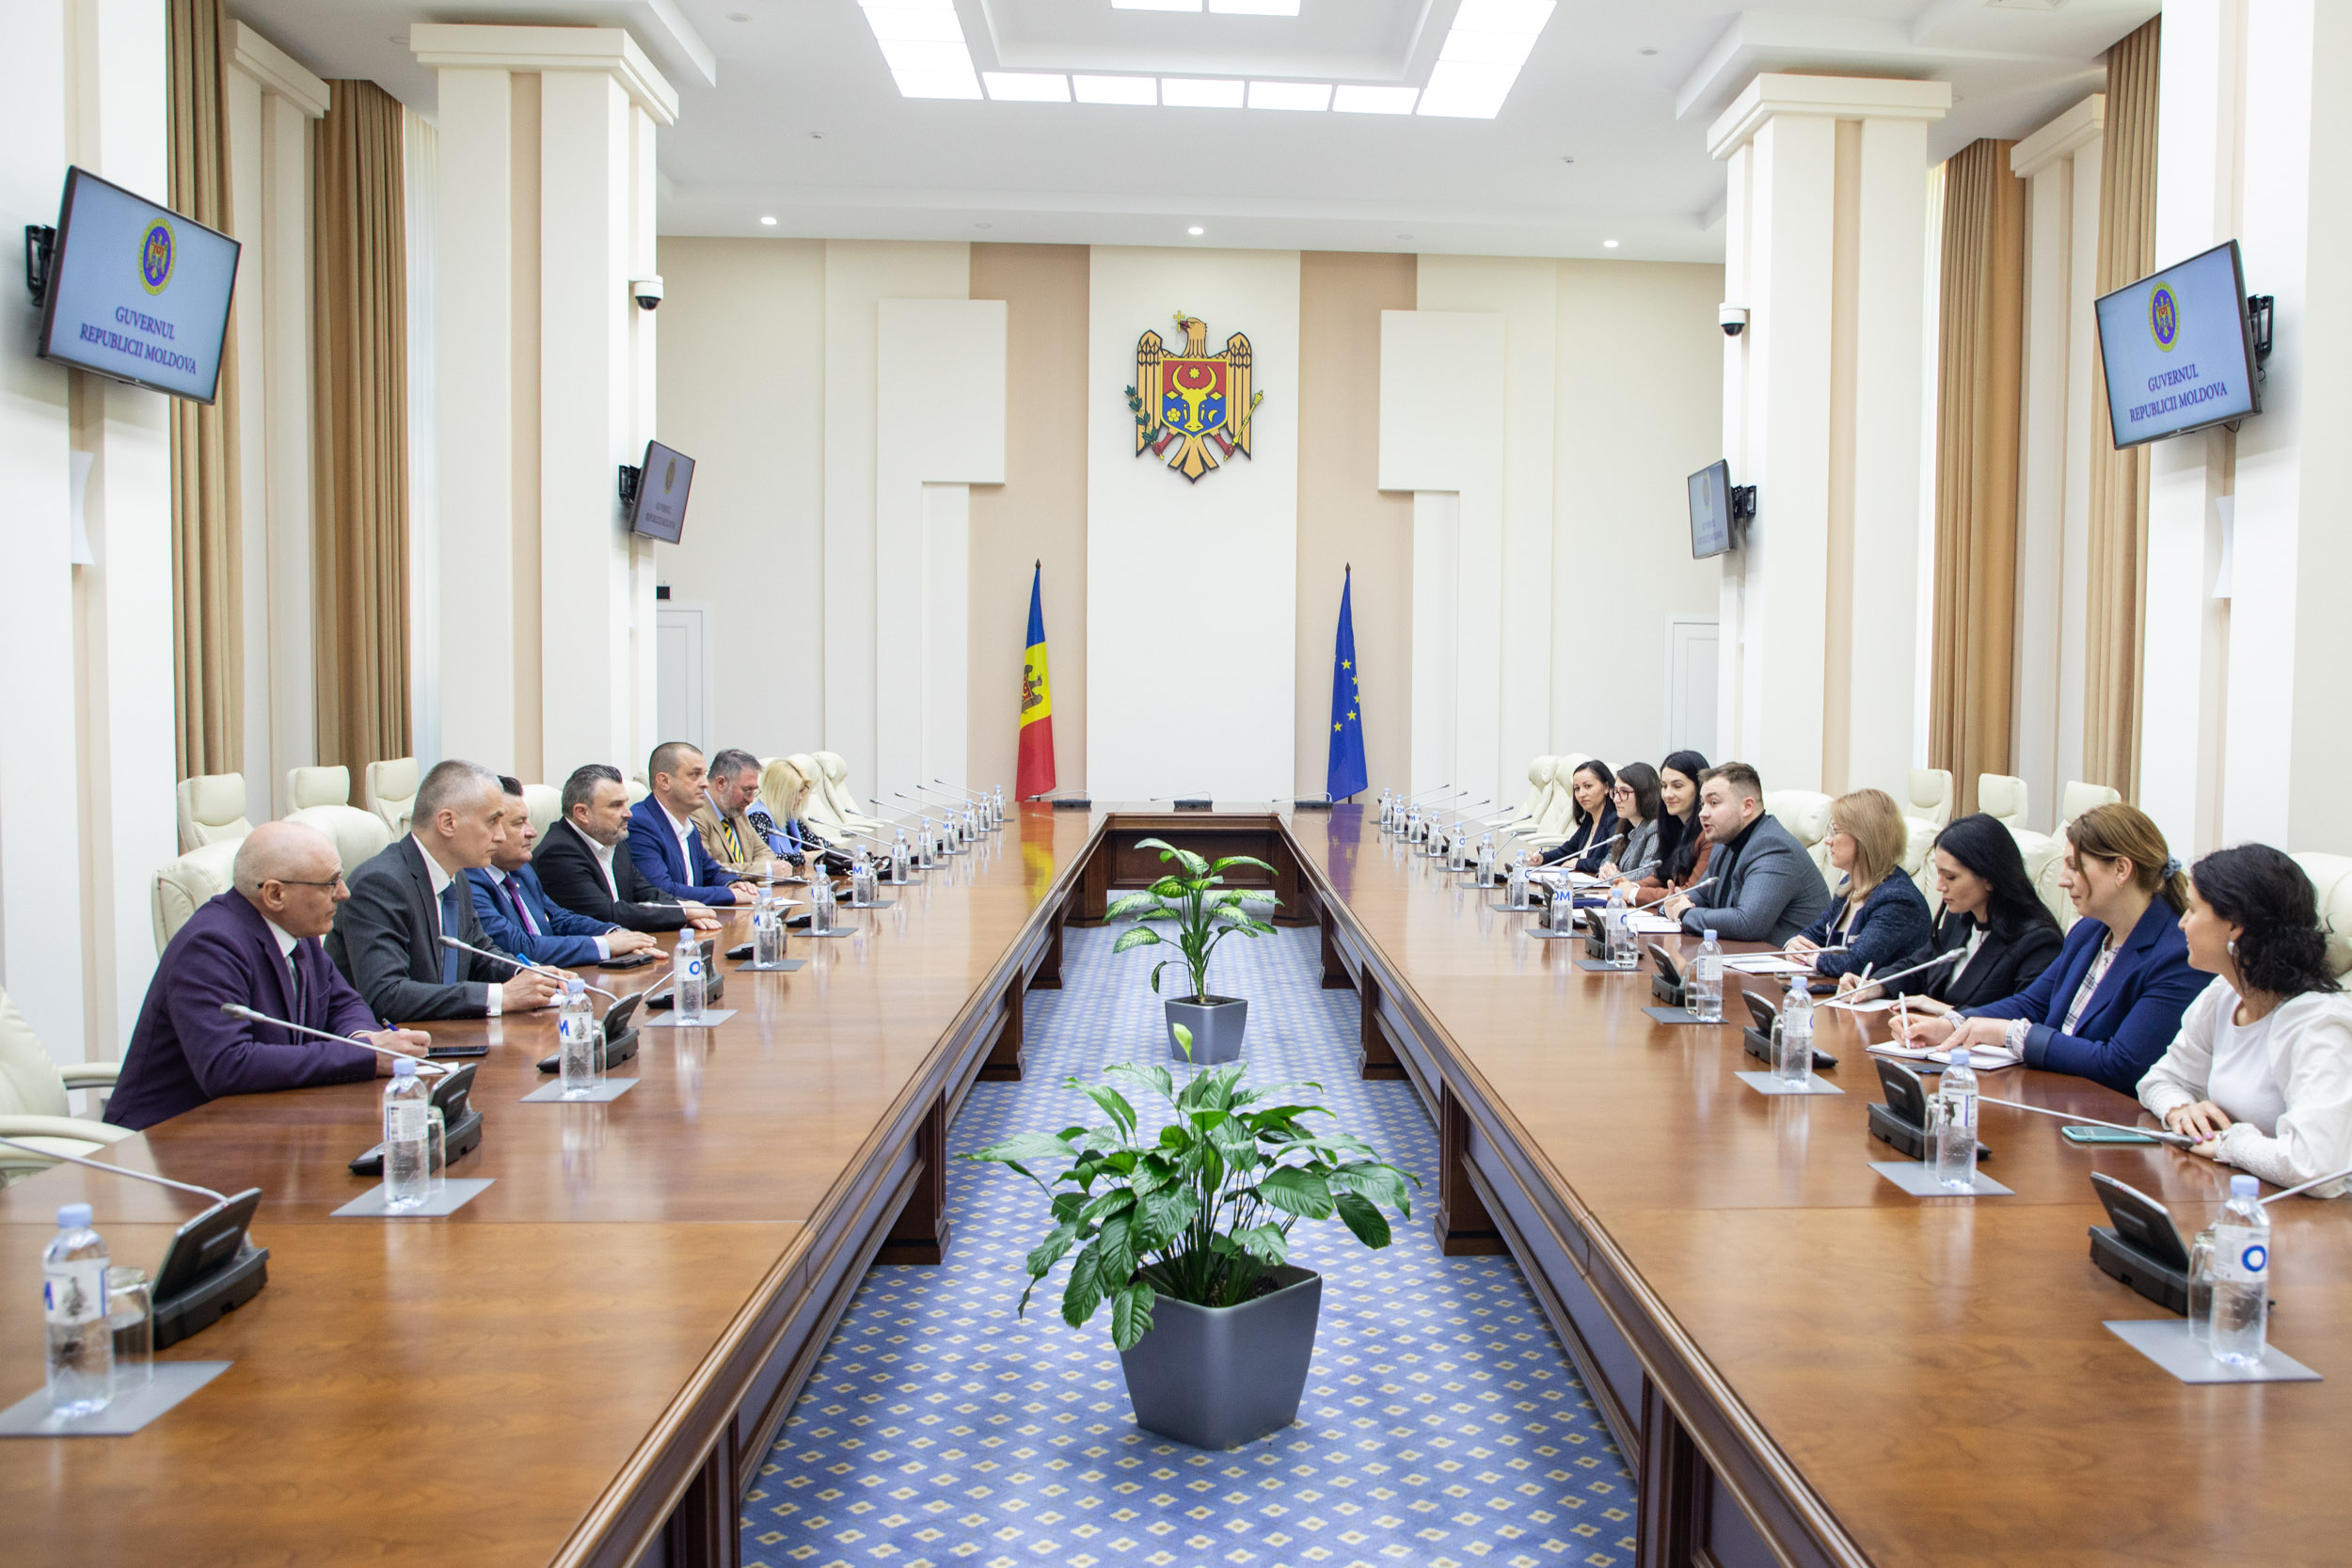 The intensification of the support offered to the diaspora, discussed at the meeting of the state secretary of the State Chancellery, Adrian Balutel with the state secretary of the DPRP, Florin-Gheorghe Cârciu